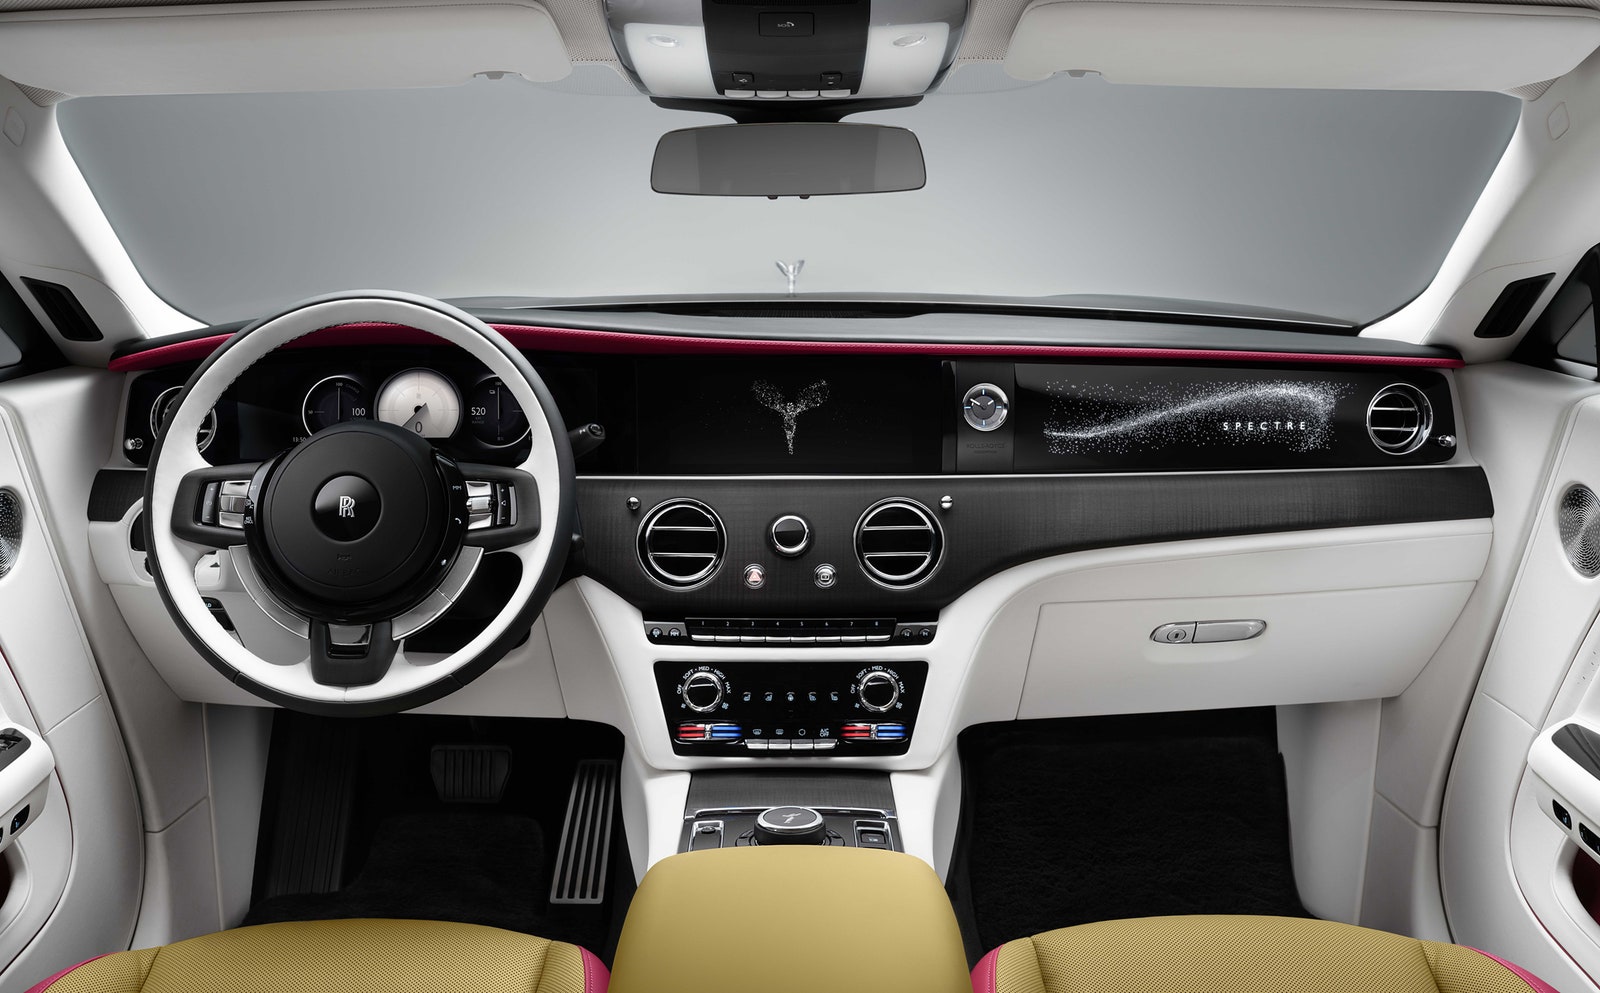 Interior dashboard and console of the Rolls Royce Spectre EV